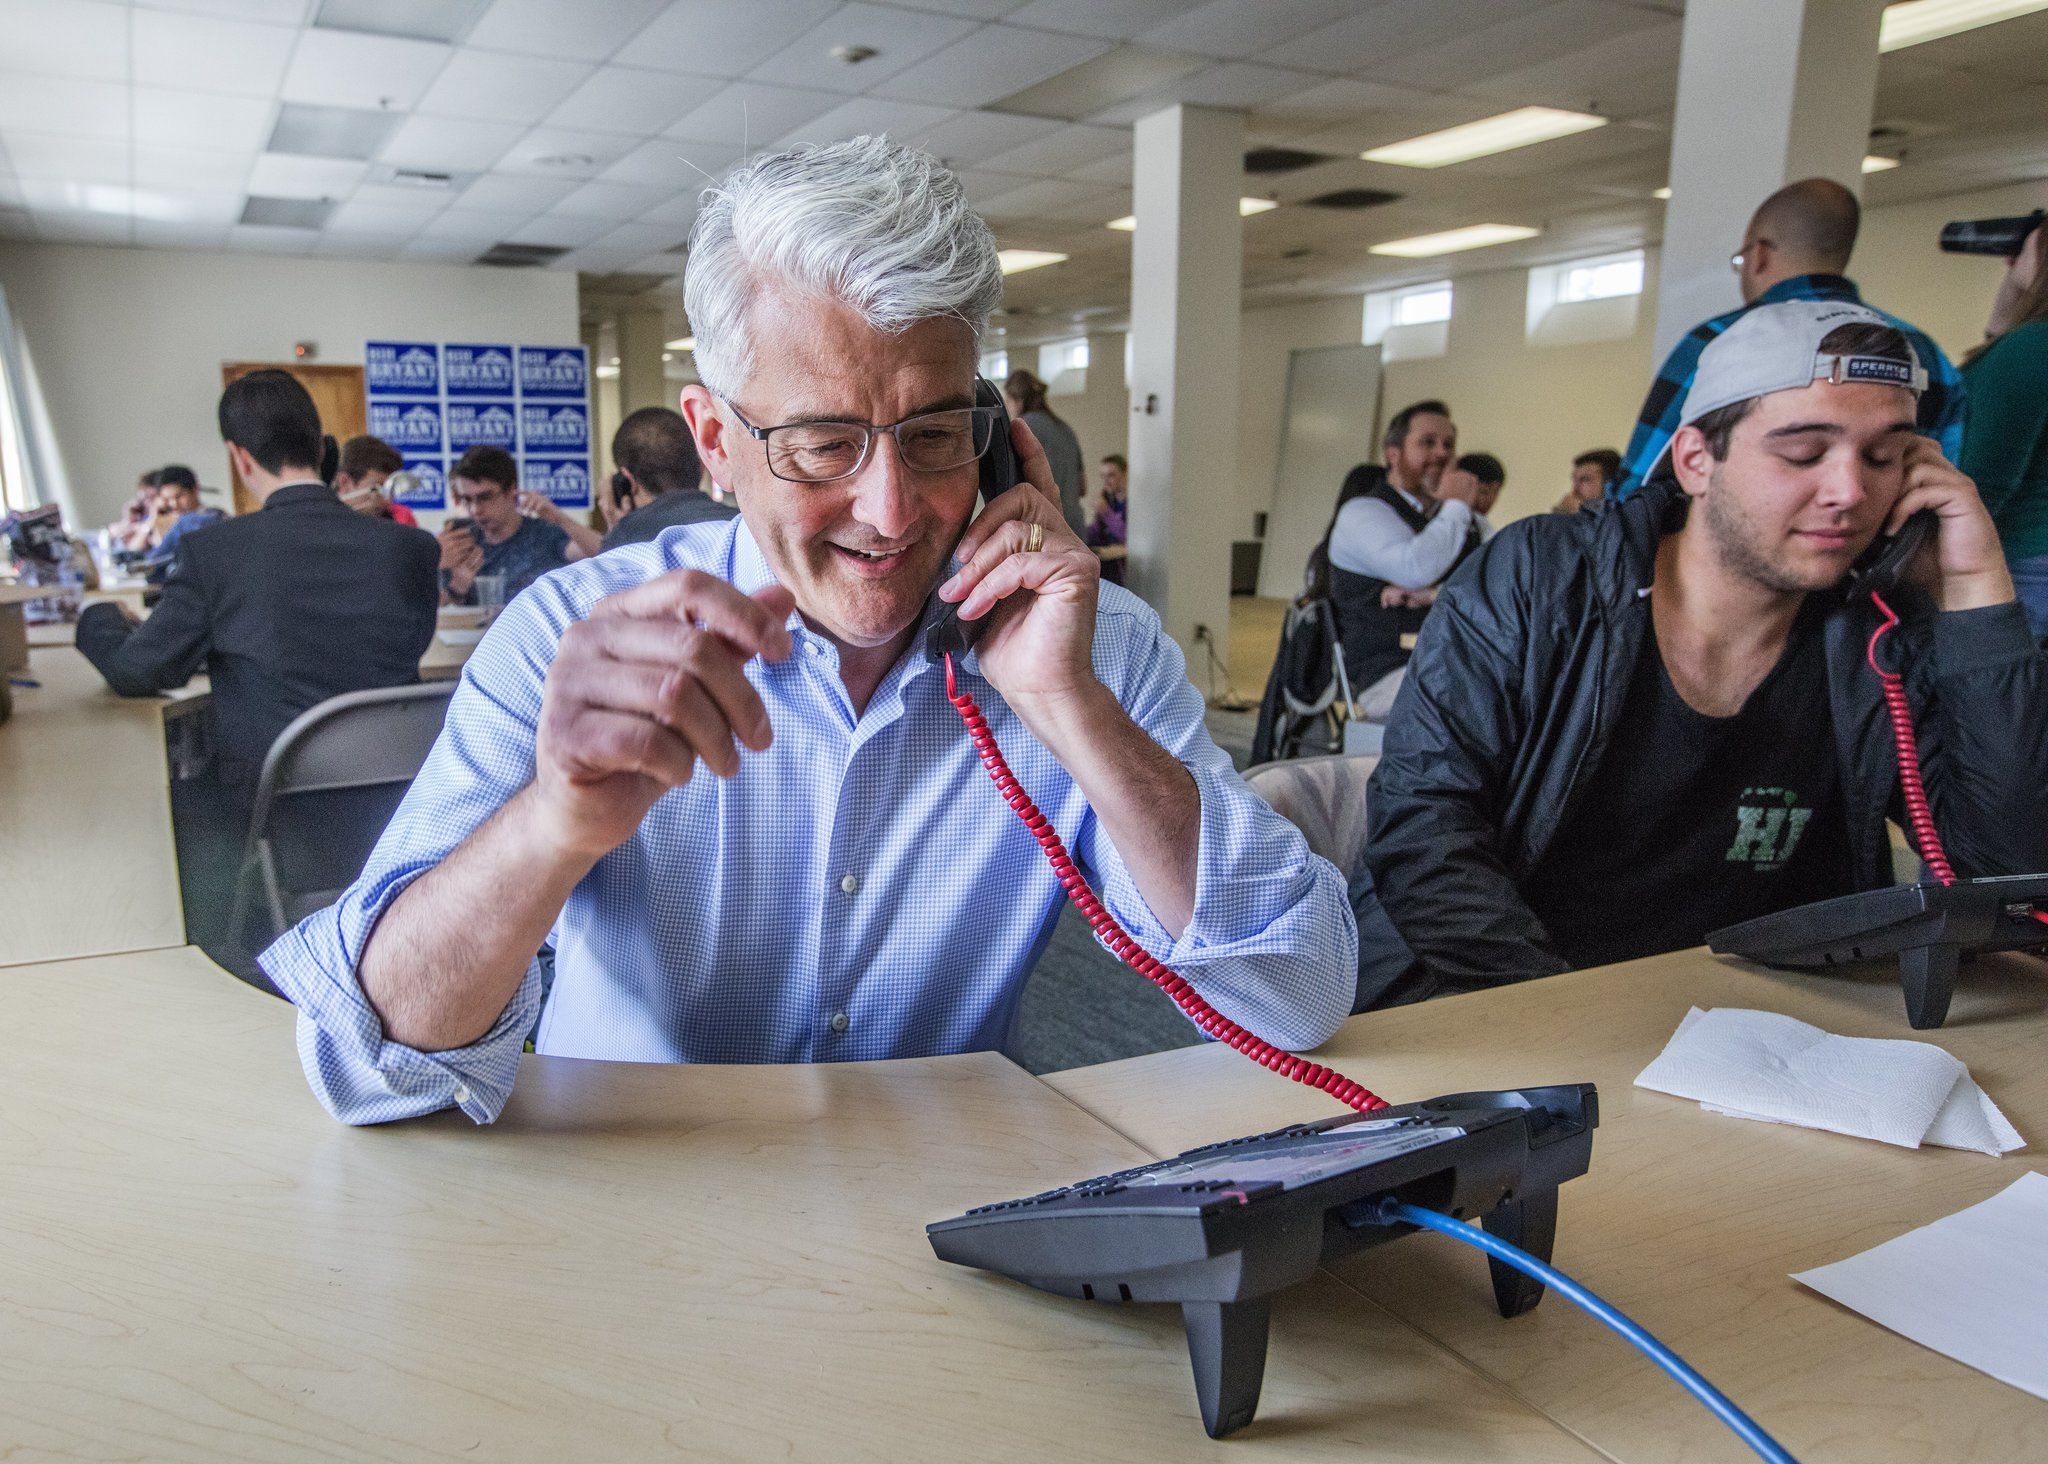 Bill Bryant, Republican candidate for Washington governor, phones potential voters and requests they submit their primary ballots Tuesday at his campaign headquarters in Seattle’s Sodo neighborhood. (Steve Ringman/The Seattle Times via AP)